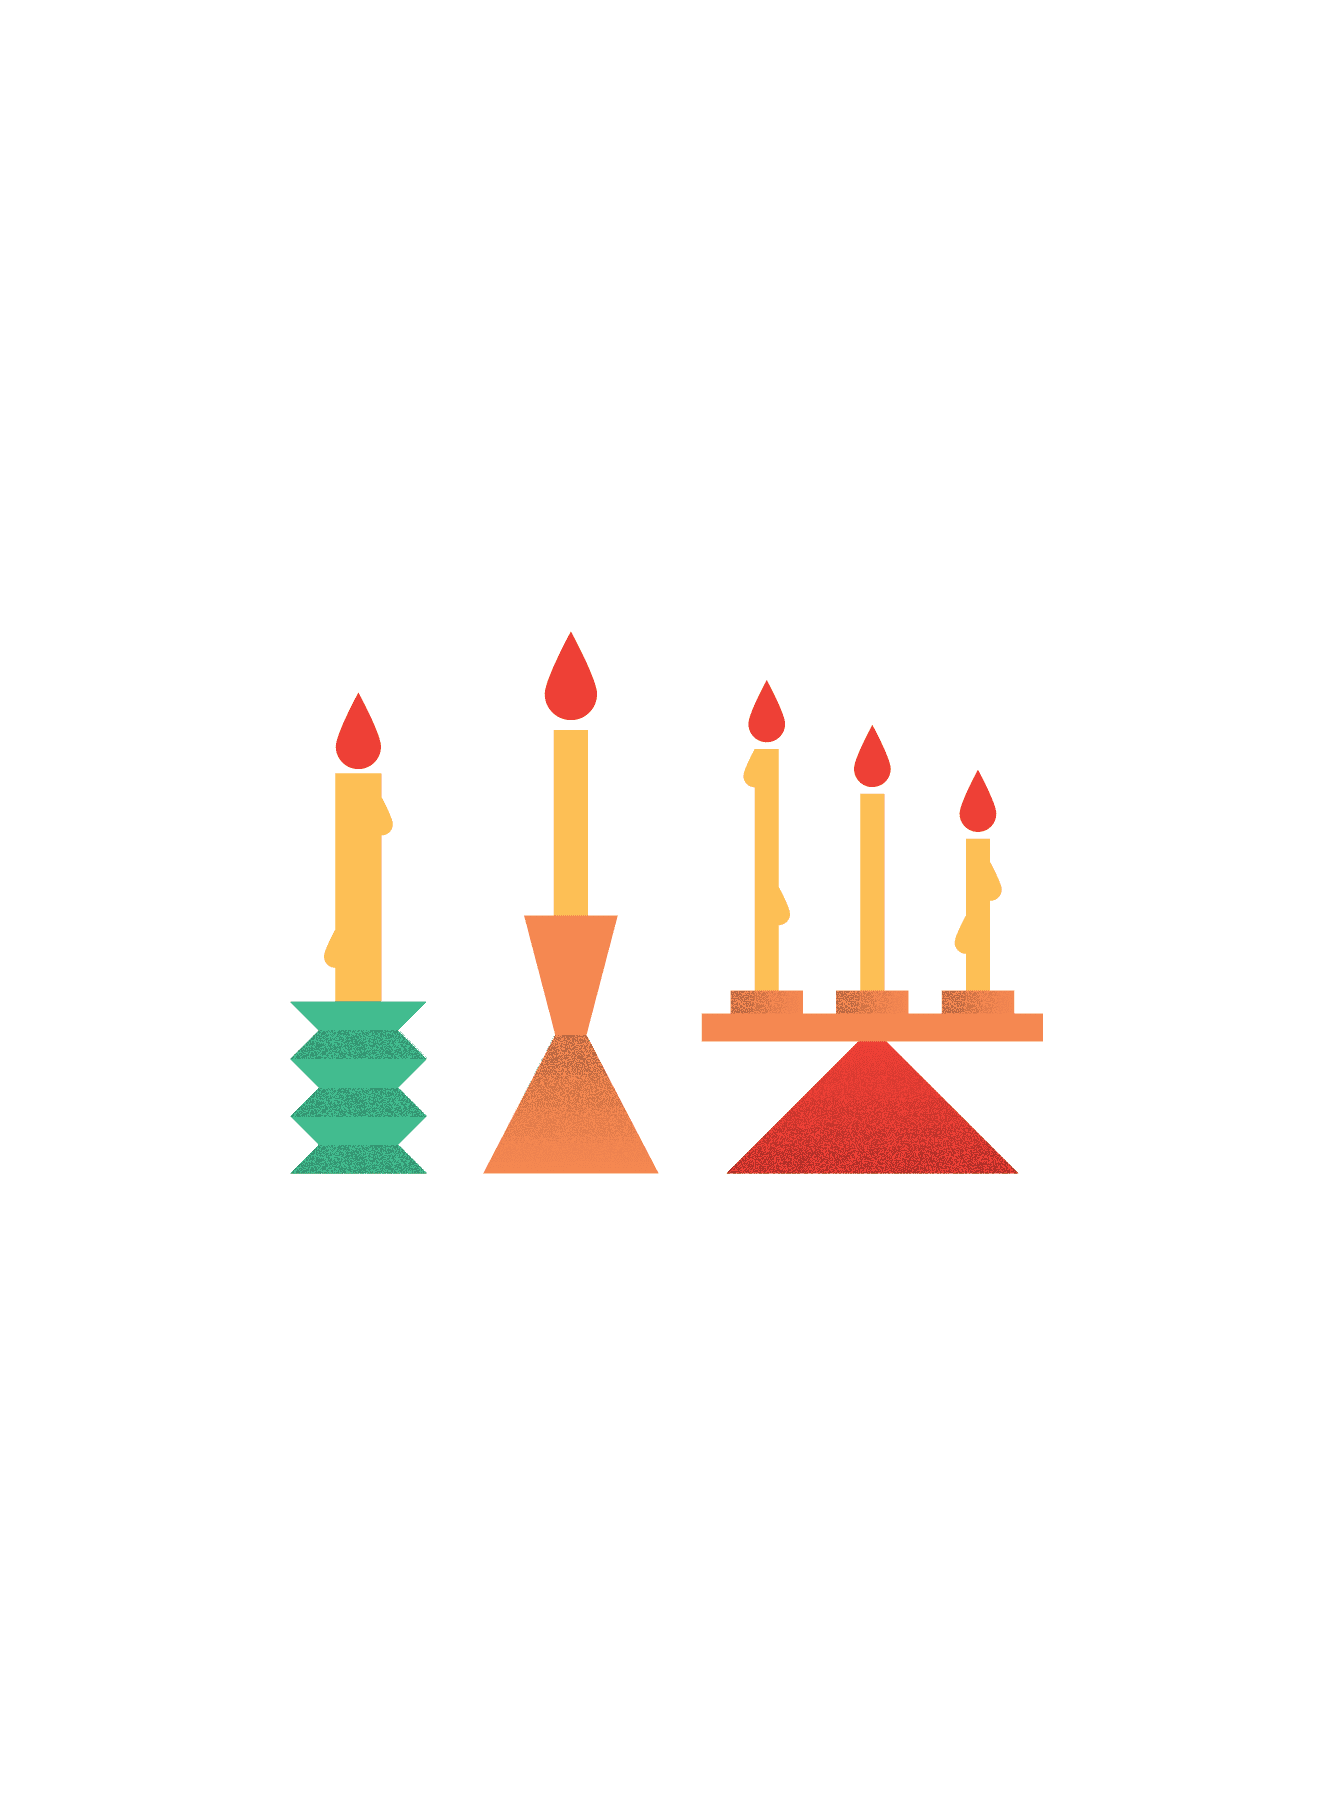 Illustration of candles (62)